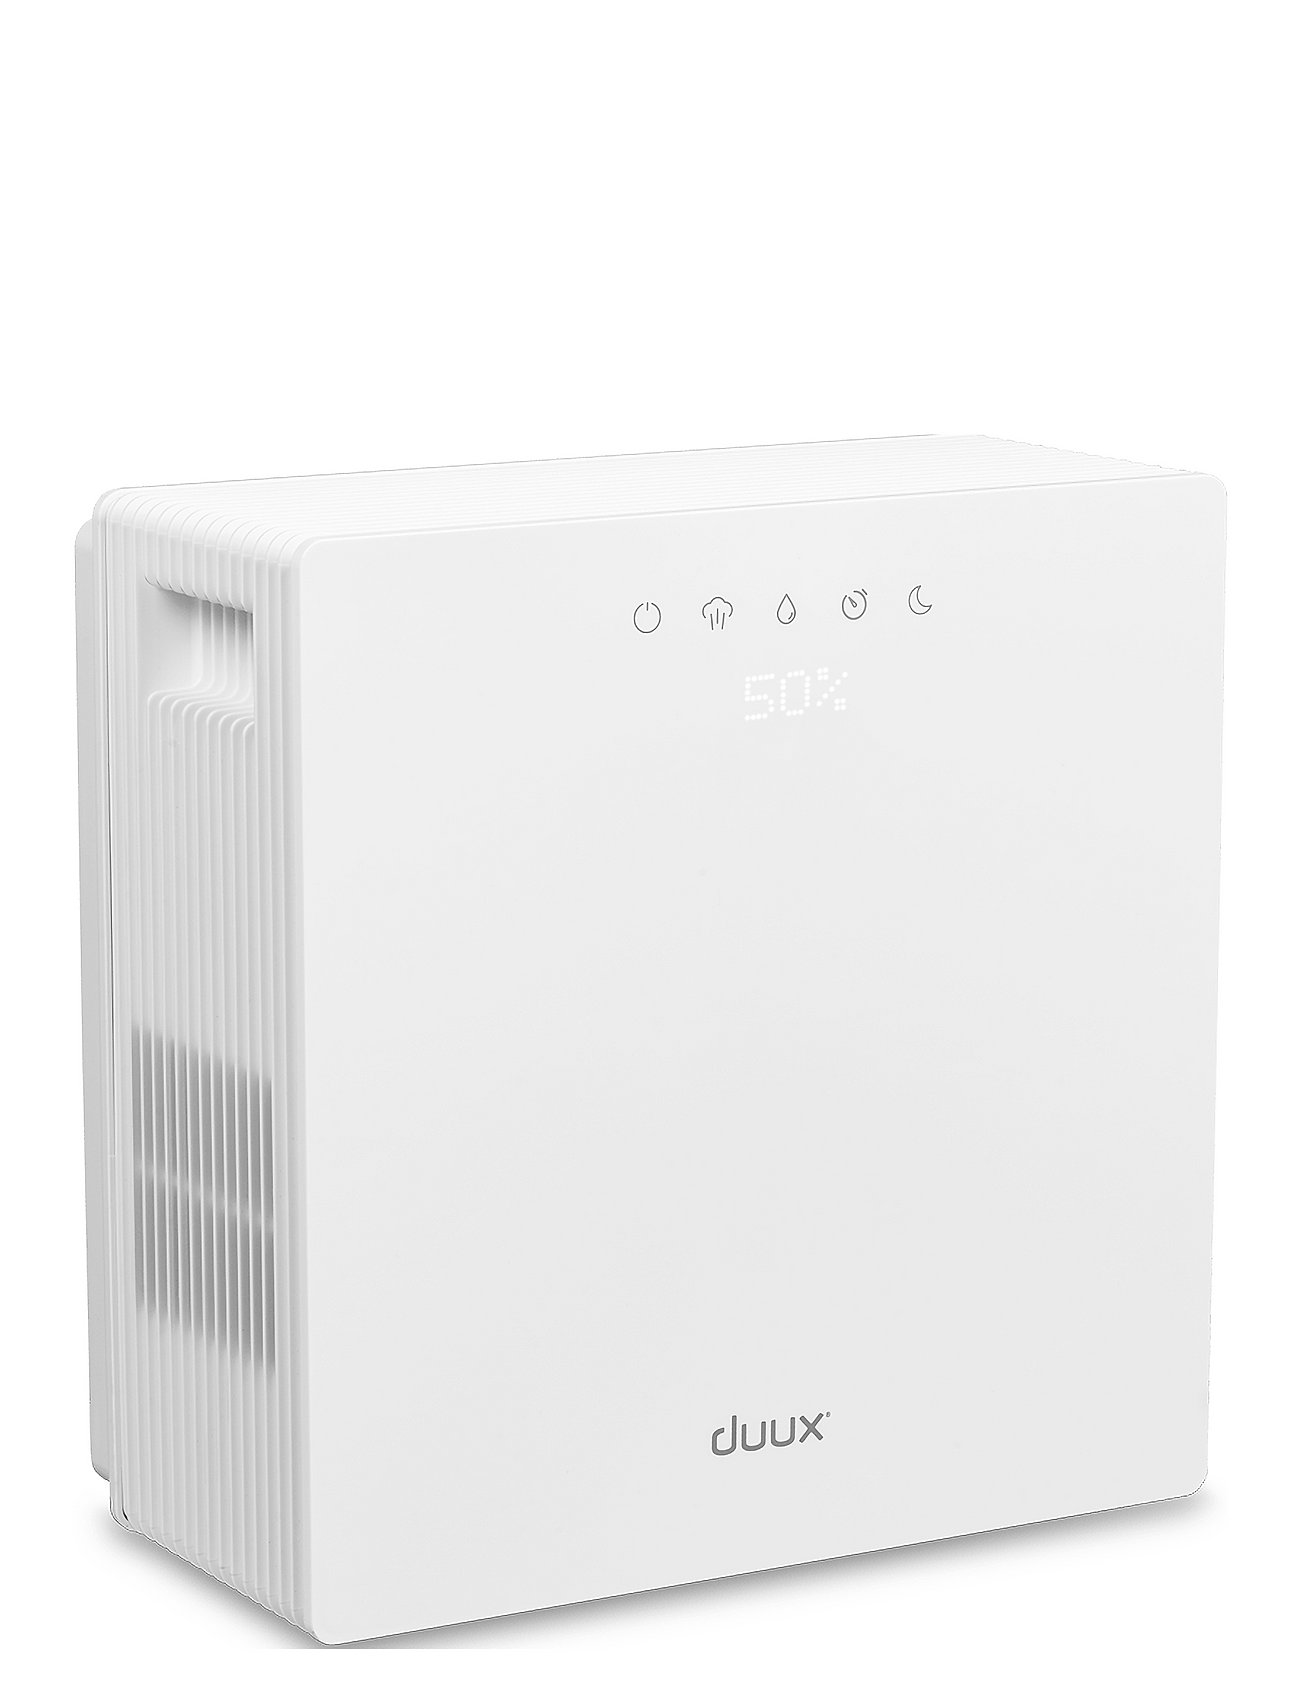 Duux "Luftfugter/Luftrenser Home Decoration Electronics Air Purifier White Duux"